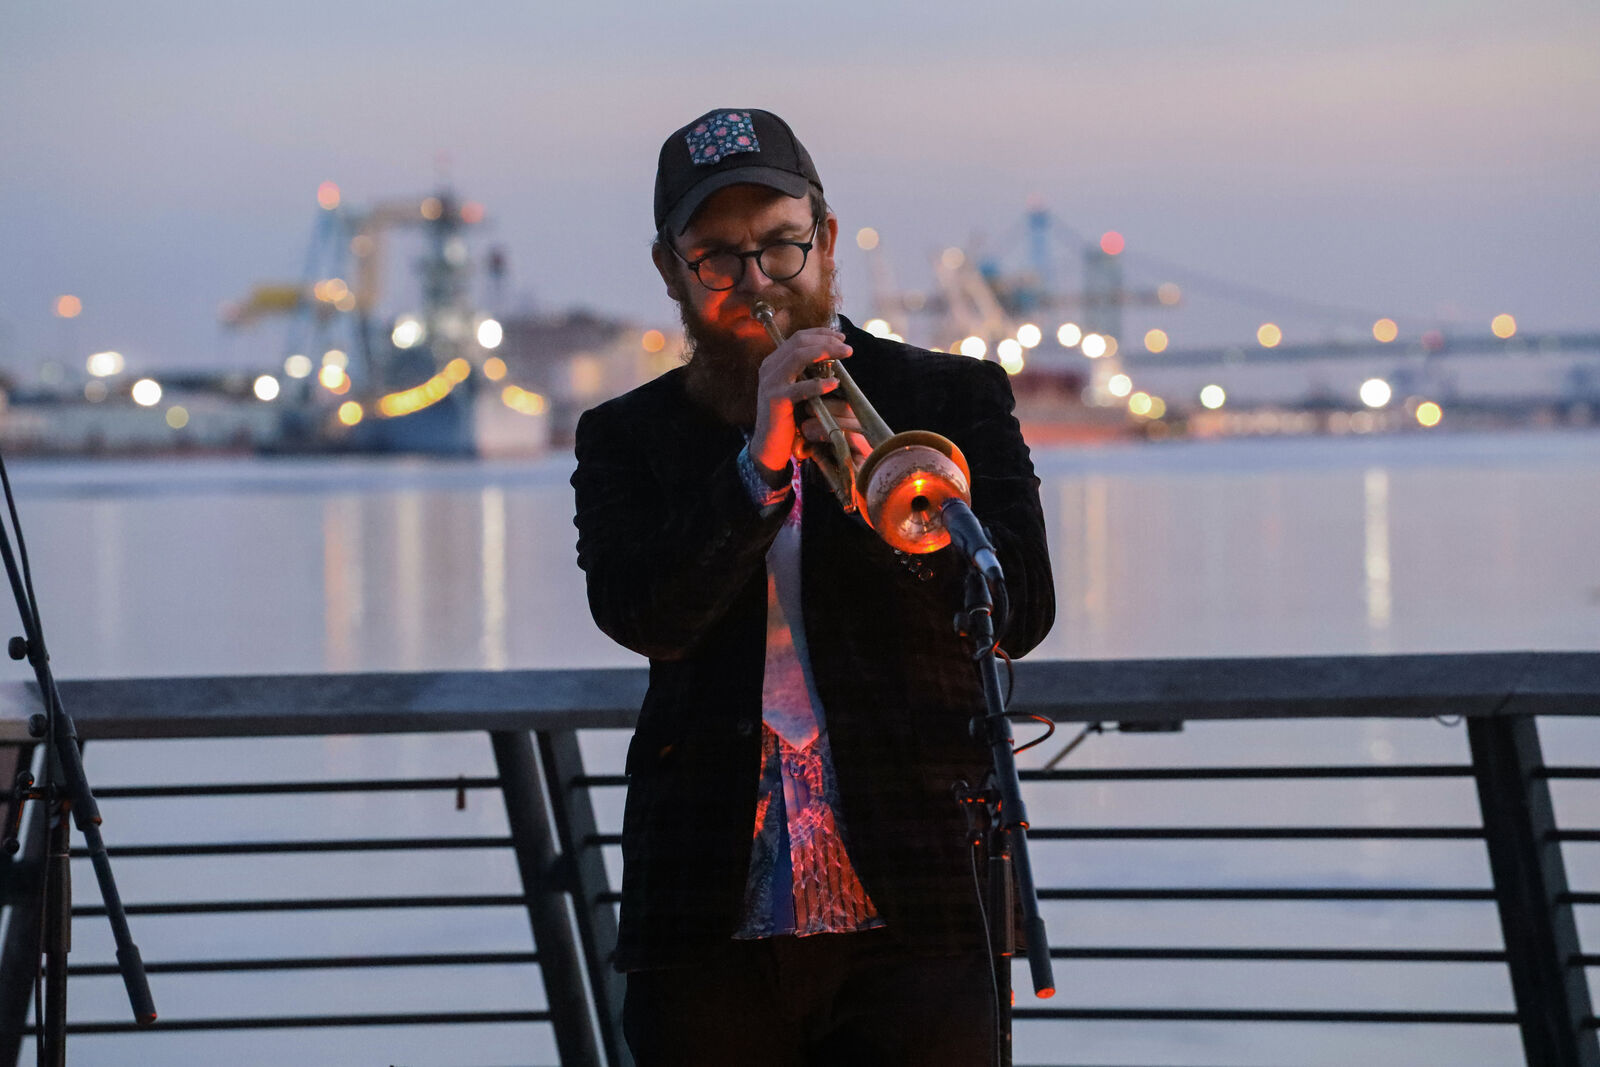 man plays trumpet in front of the waterfront